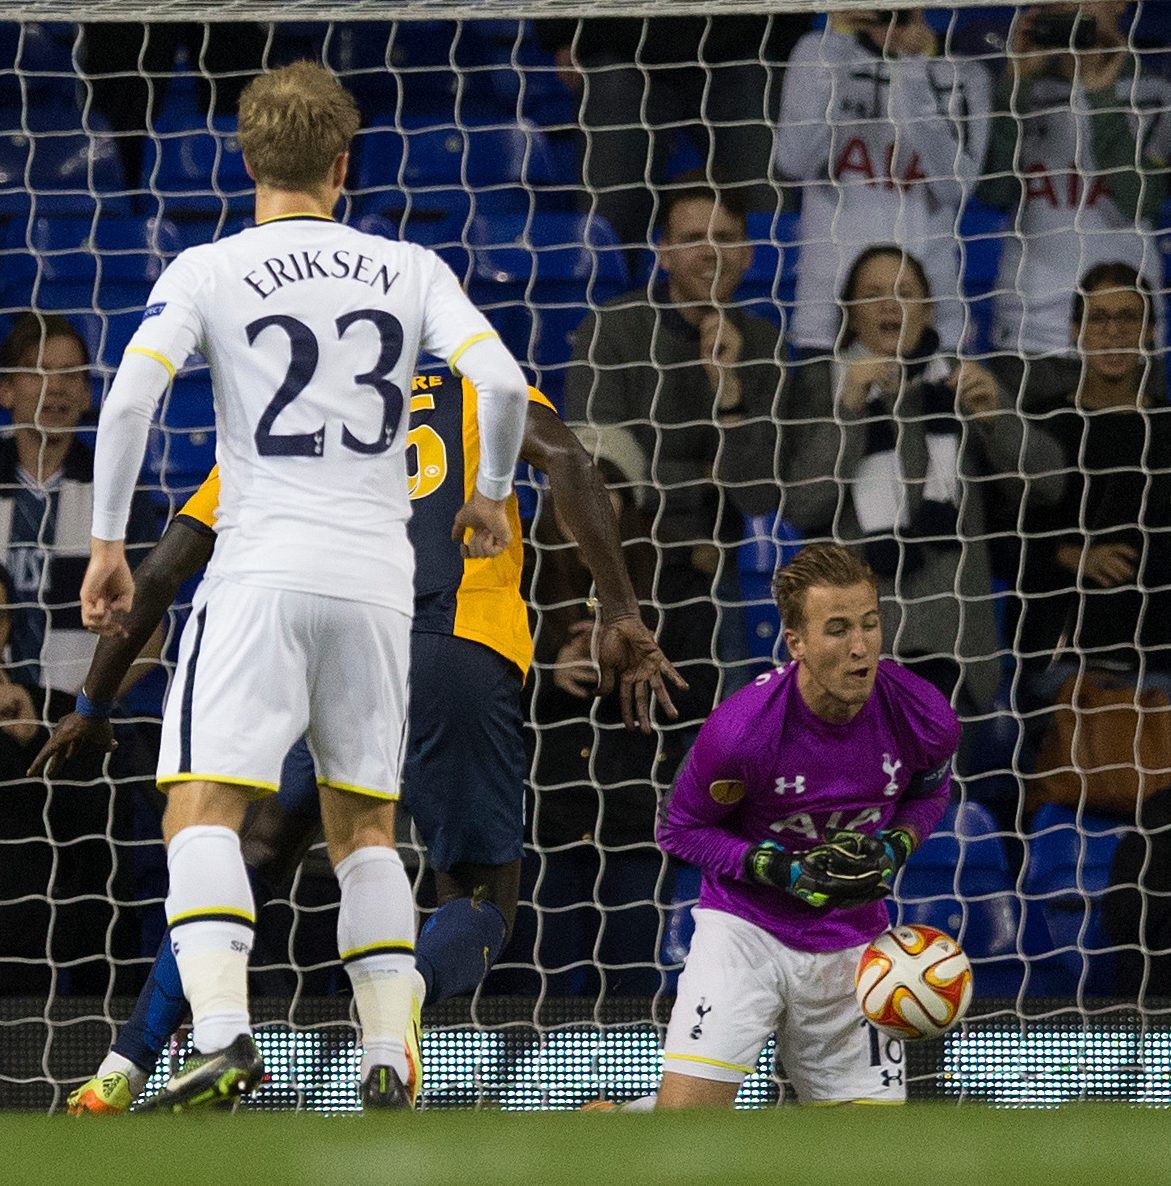 Harry Kane scored a hat-trick, then went in goal and spilled a free kick